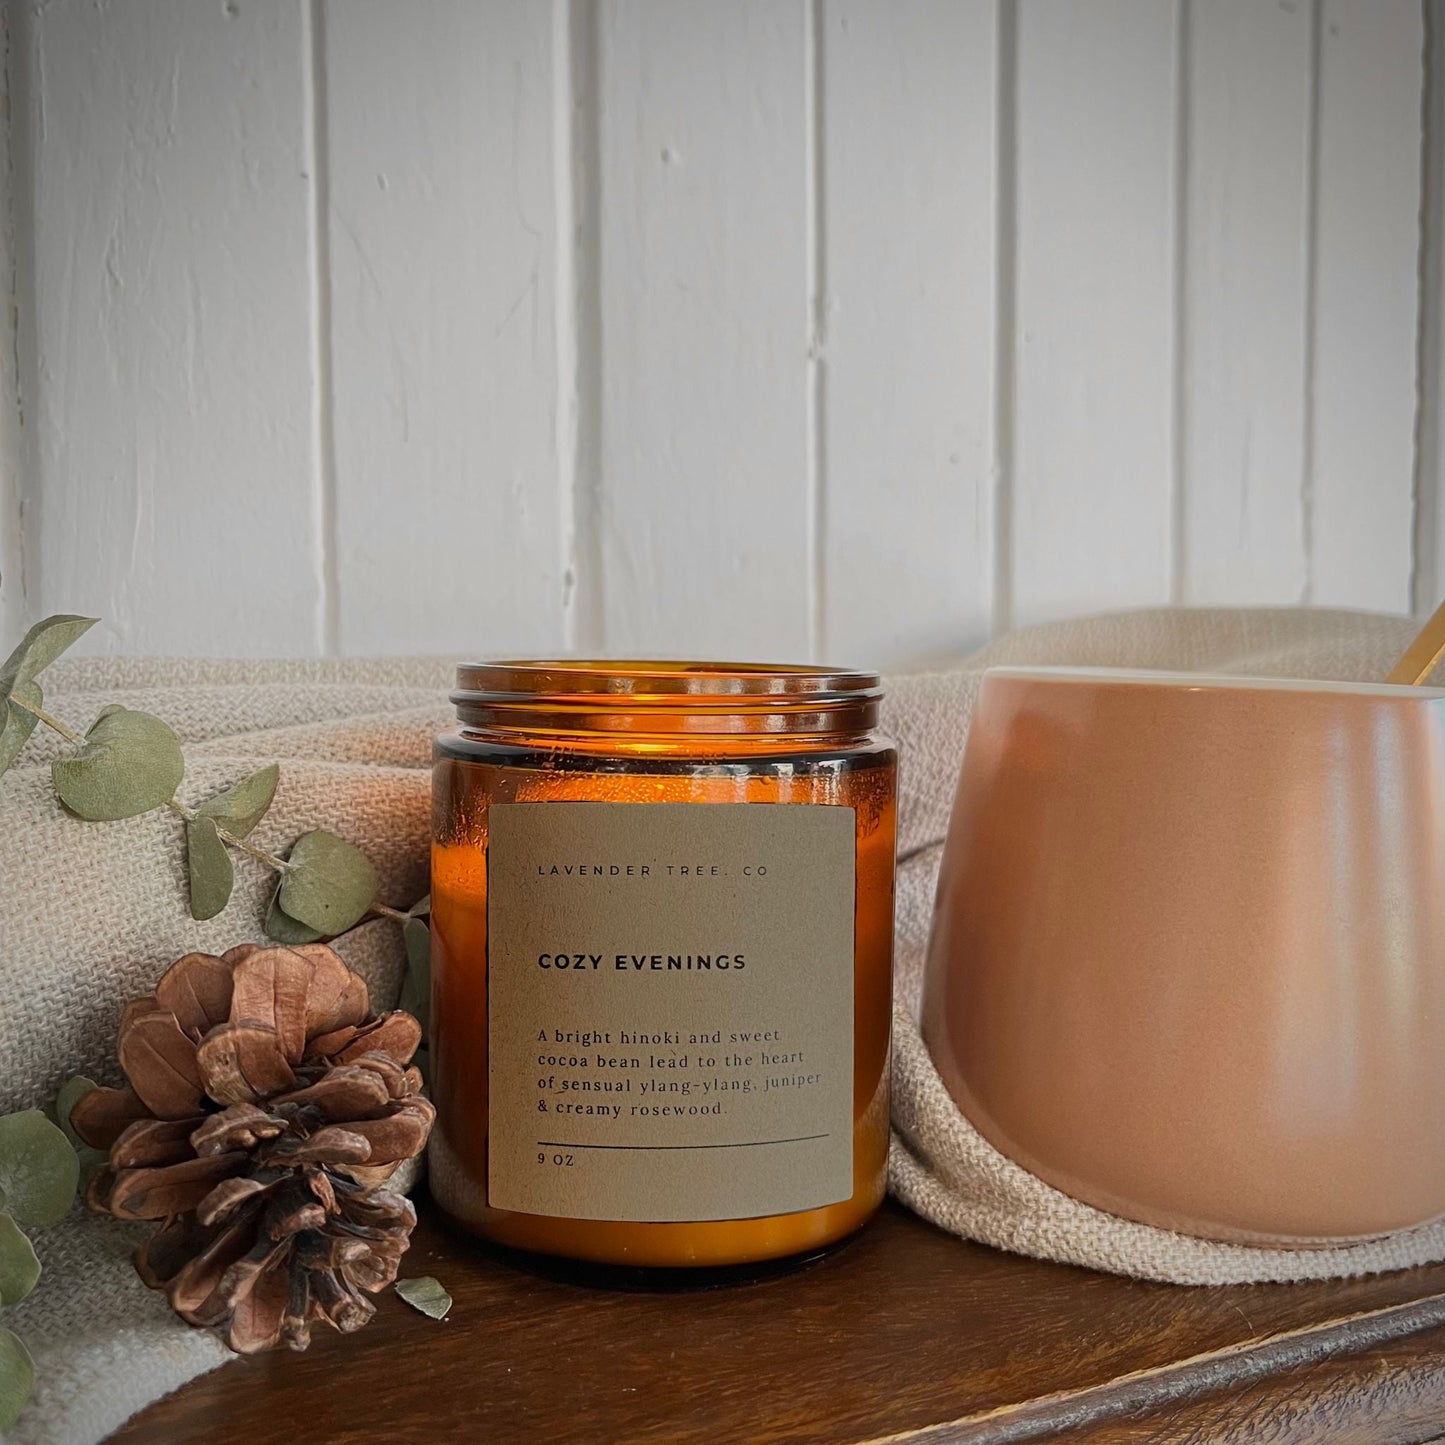 Lavender Tree Co. - Lavender Tree Co Cozy Evenings Candle - ORESTA clean beauty simplified